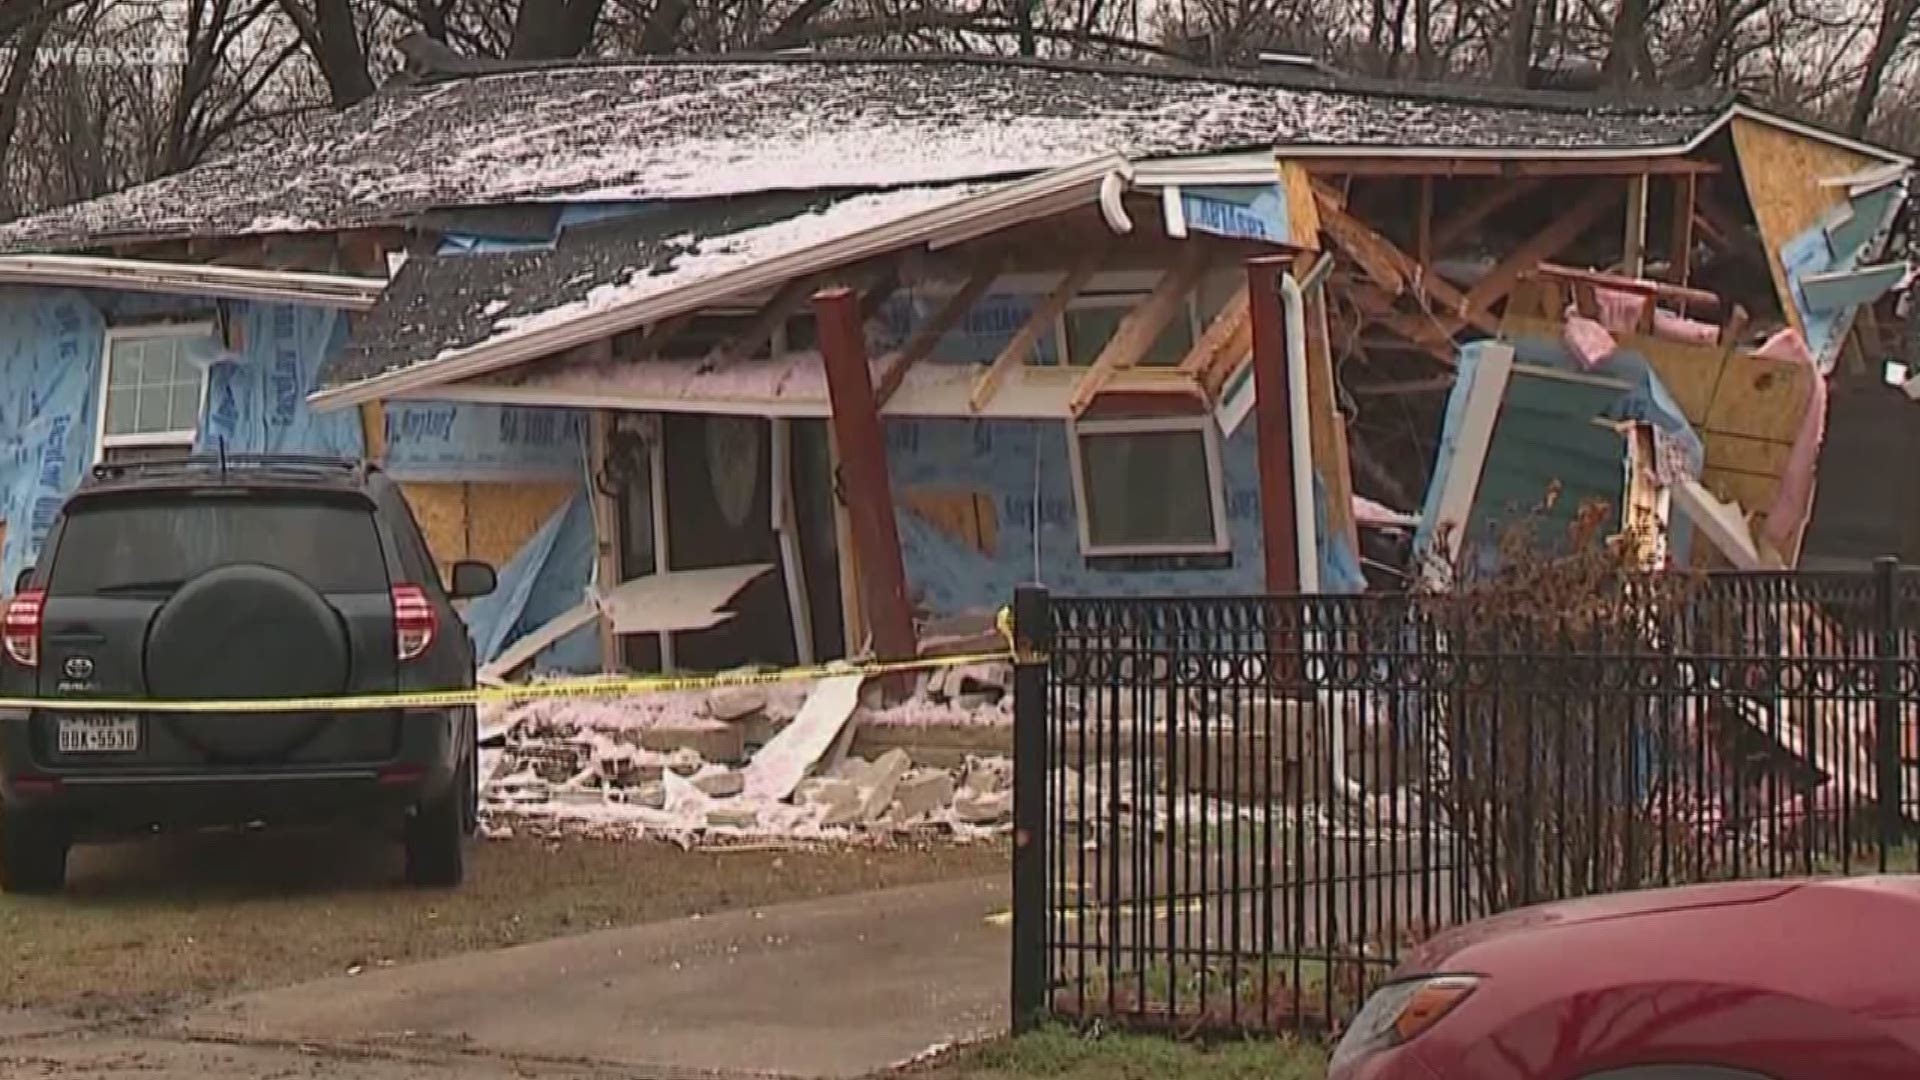 The company continues to replace gas lines in northwest Dallas following a home explosion that killed a 12-year-old girl in February.